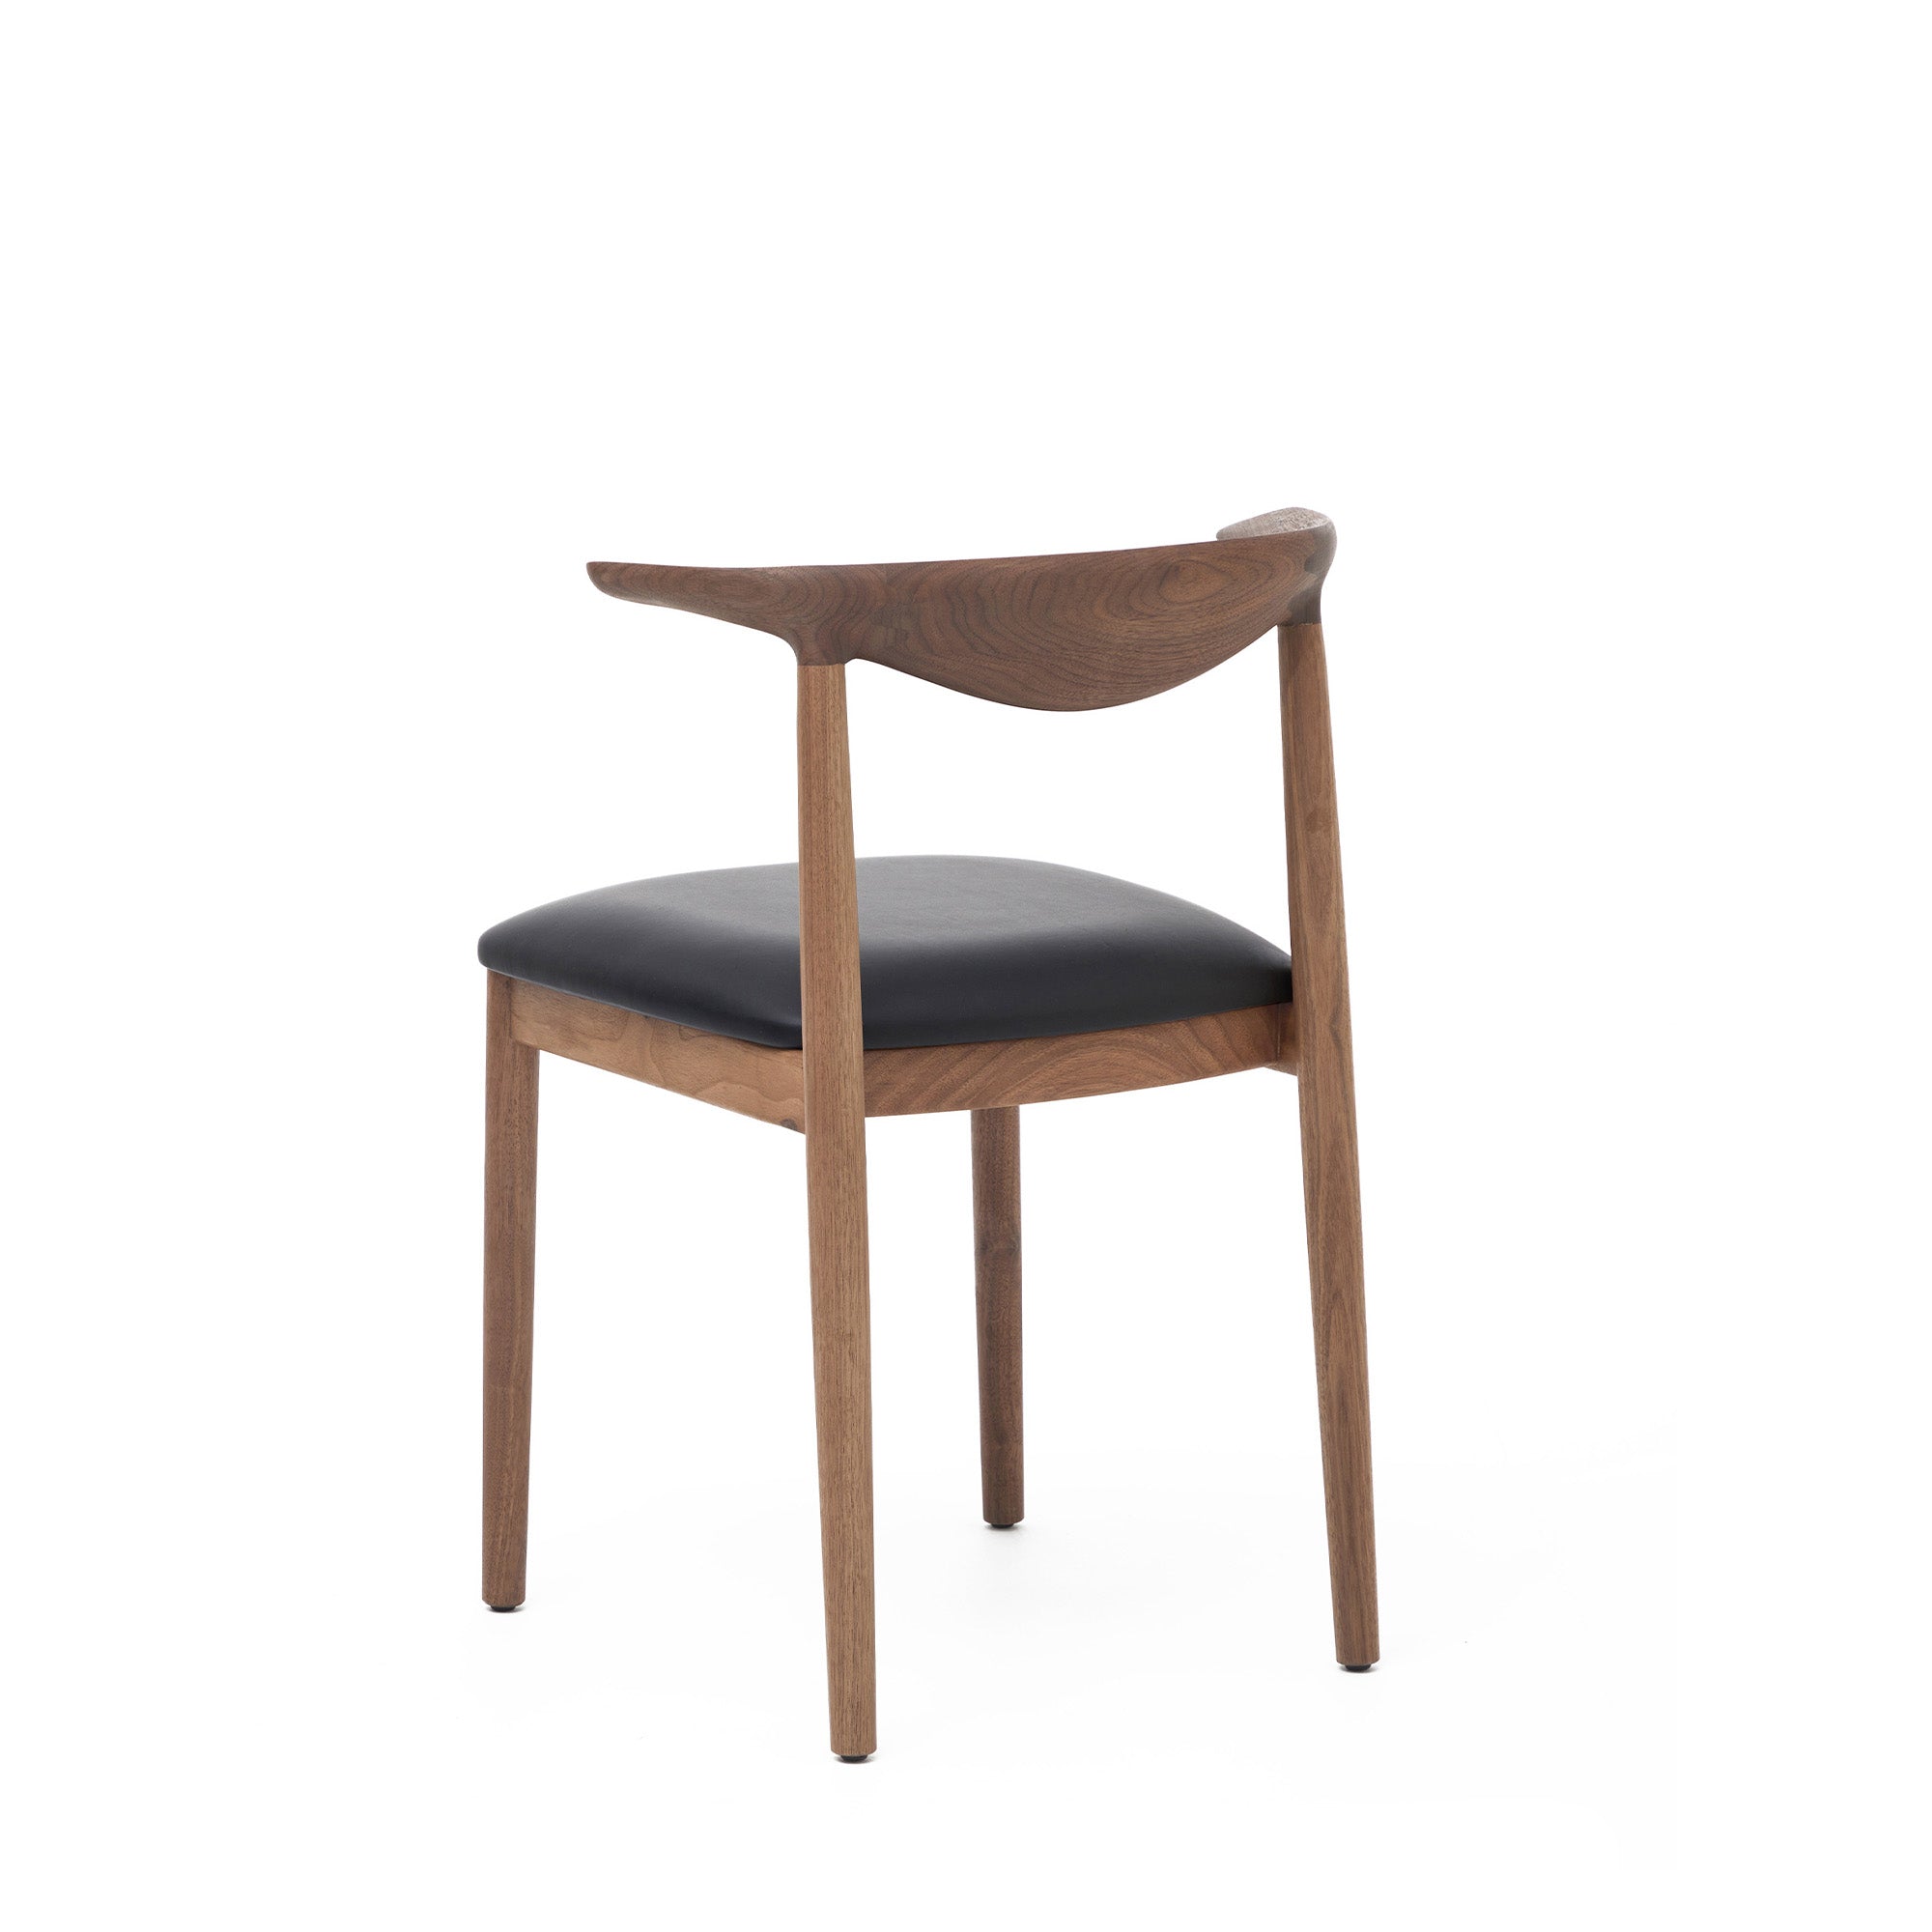 Delta%20Chair%20in%20Walnut%20&%20Black%20Leather image 5